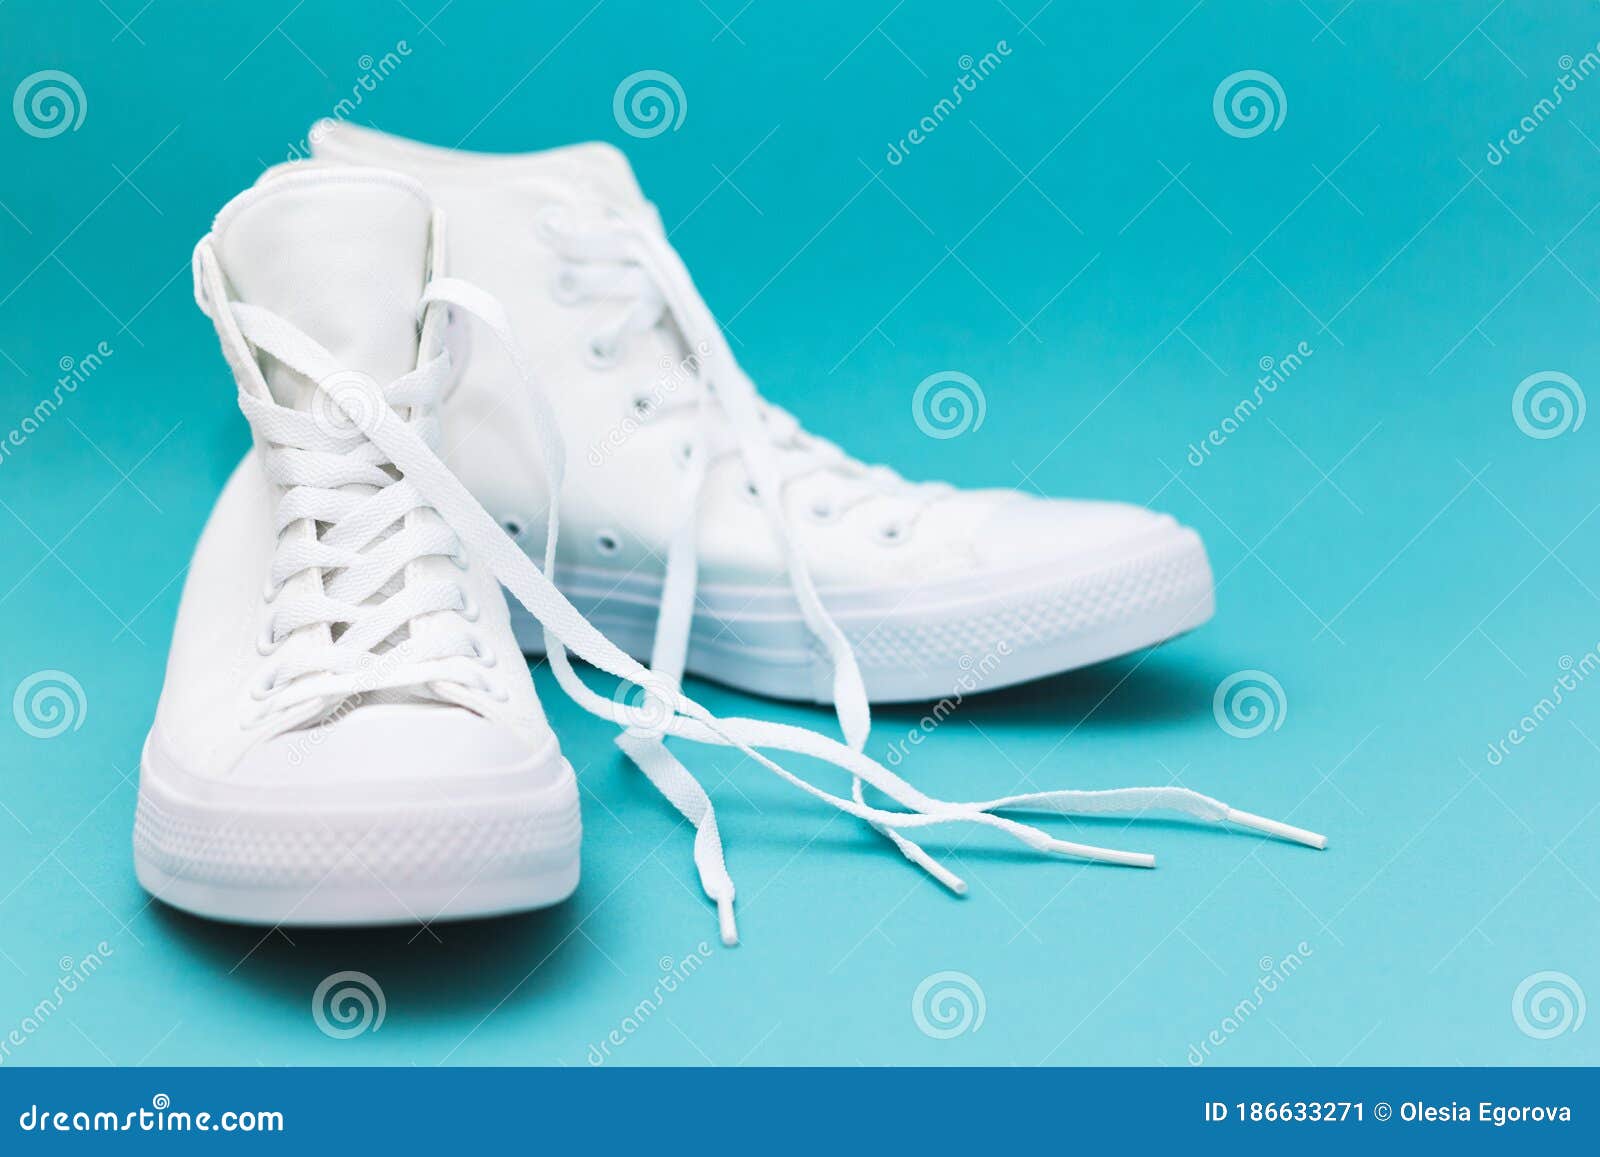 Pair of New White Sneakers on Blue Background Stock Image - Image of ...